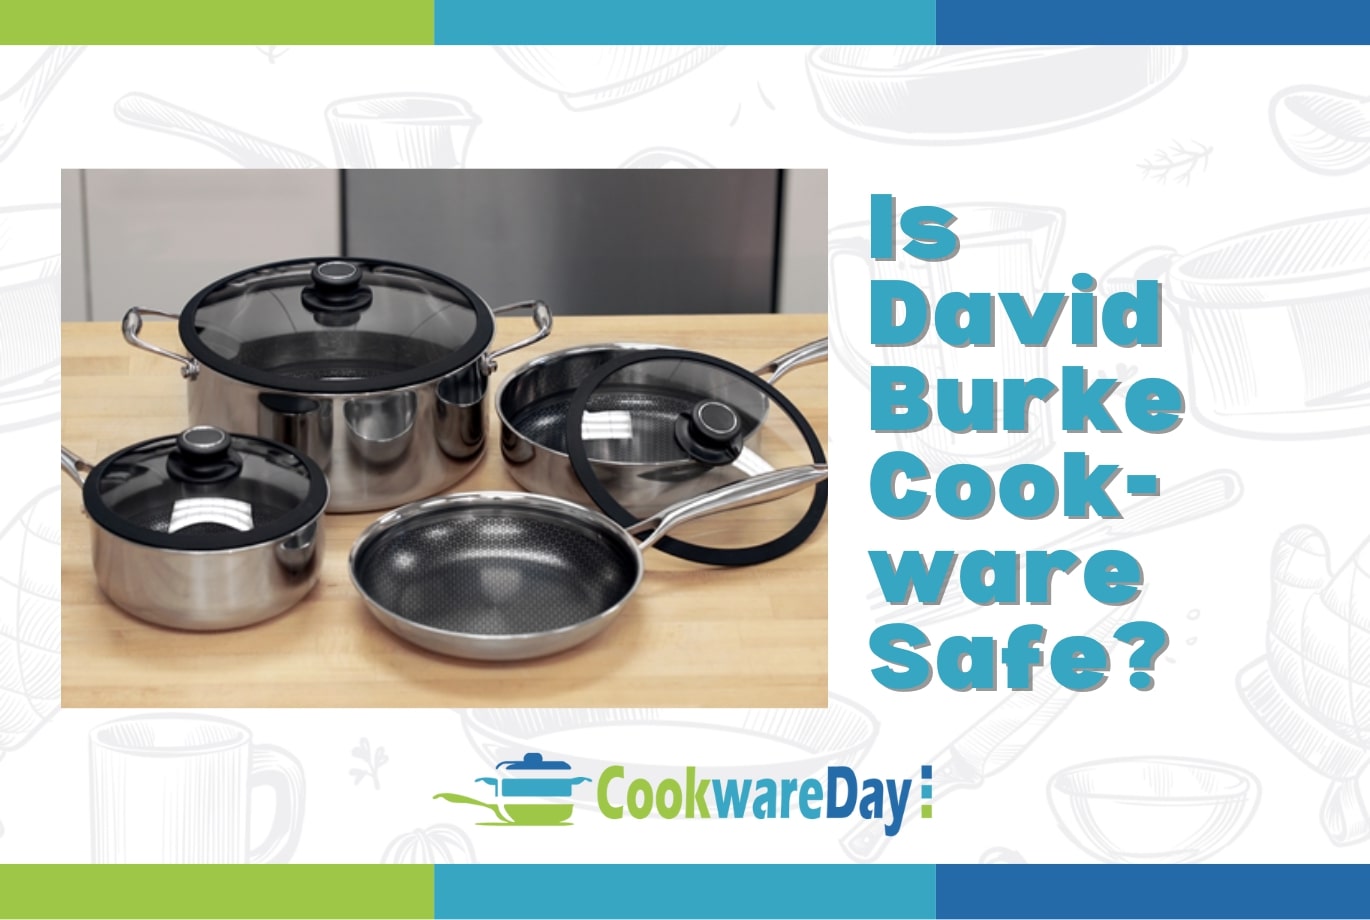 Is David Burke Cookware Safe? Know The Facts! - NonToxic Life